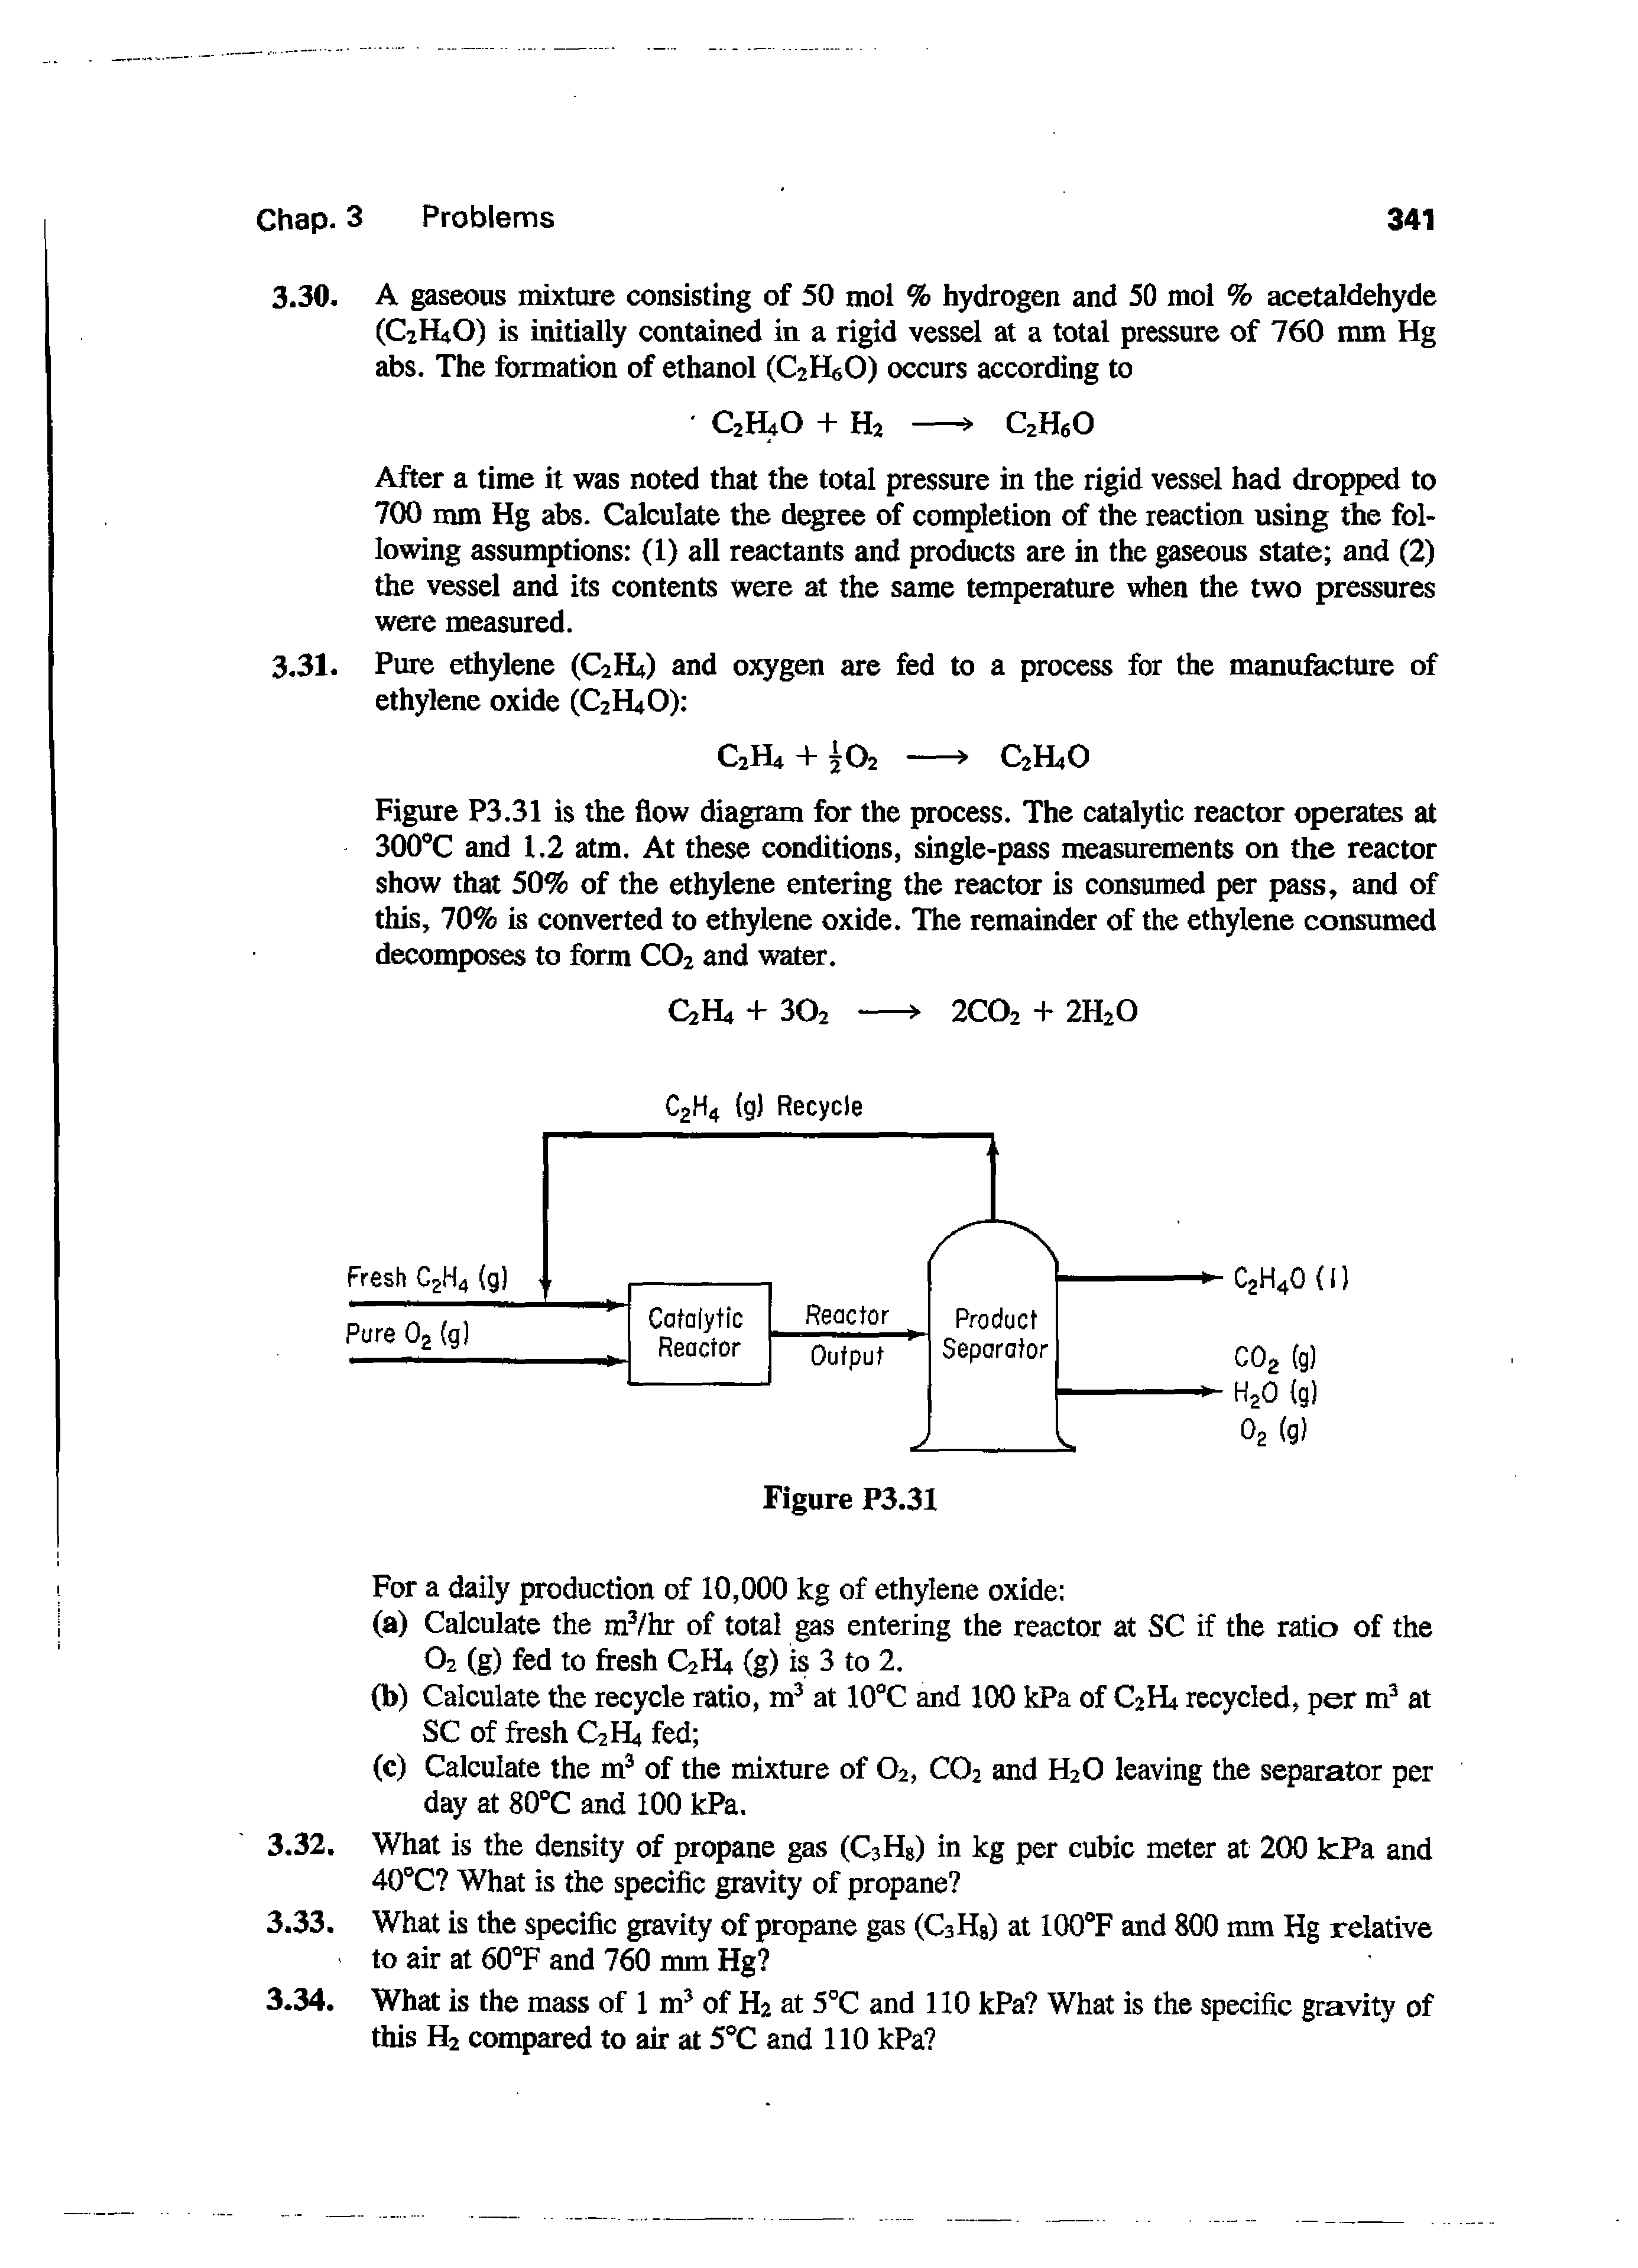 Figure P3.31 is the flow diagram for the process. The catalytic reactor operates at 300 C and 1.2 atm. At these conditions, single-pass measurements on the reactor show that 50% of the ethylene entering the reactor is consumed per pass, and of this, 70% is converted to ethylene oxide. The remainder of the ethylene consumed decomposes to form CO2 and water.